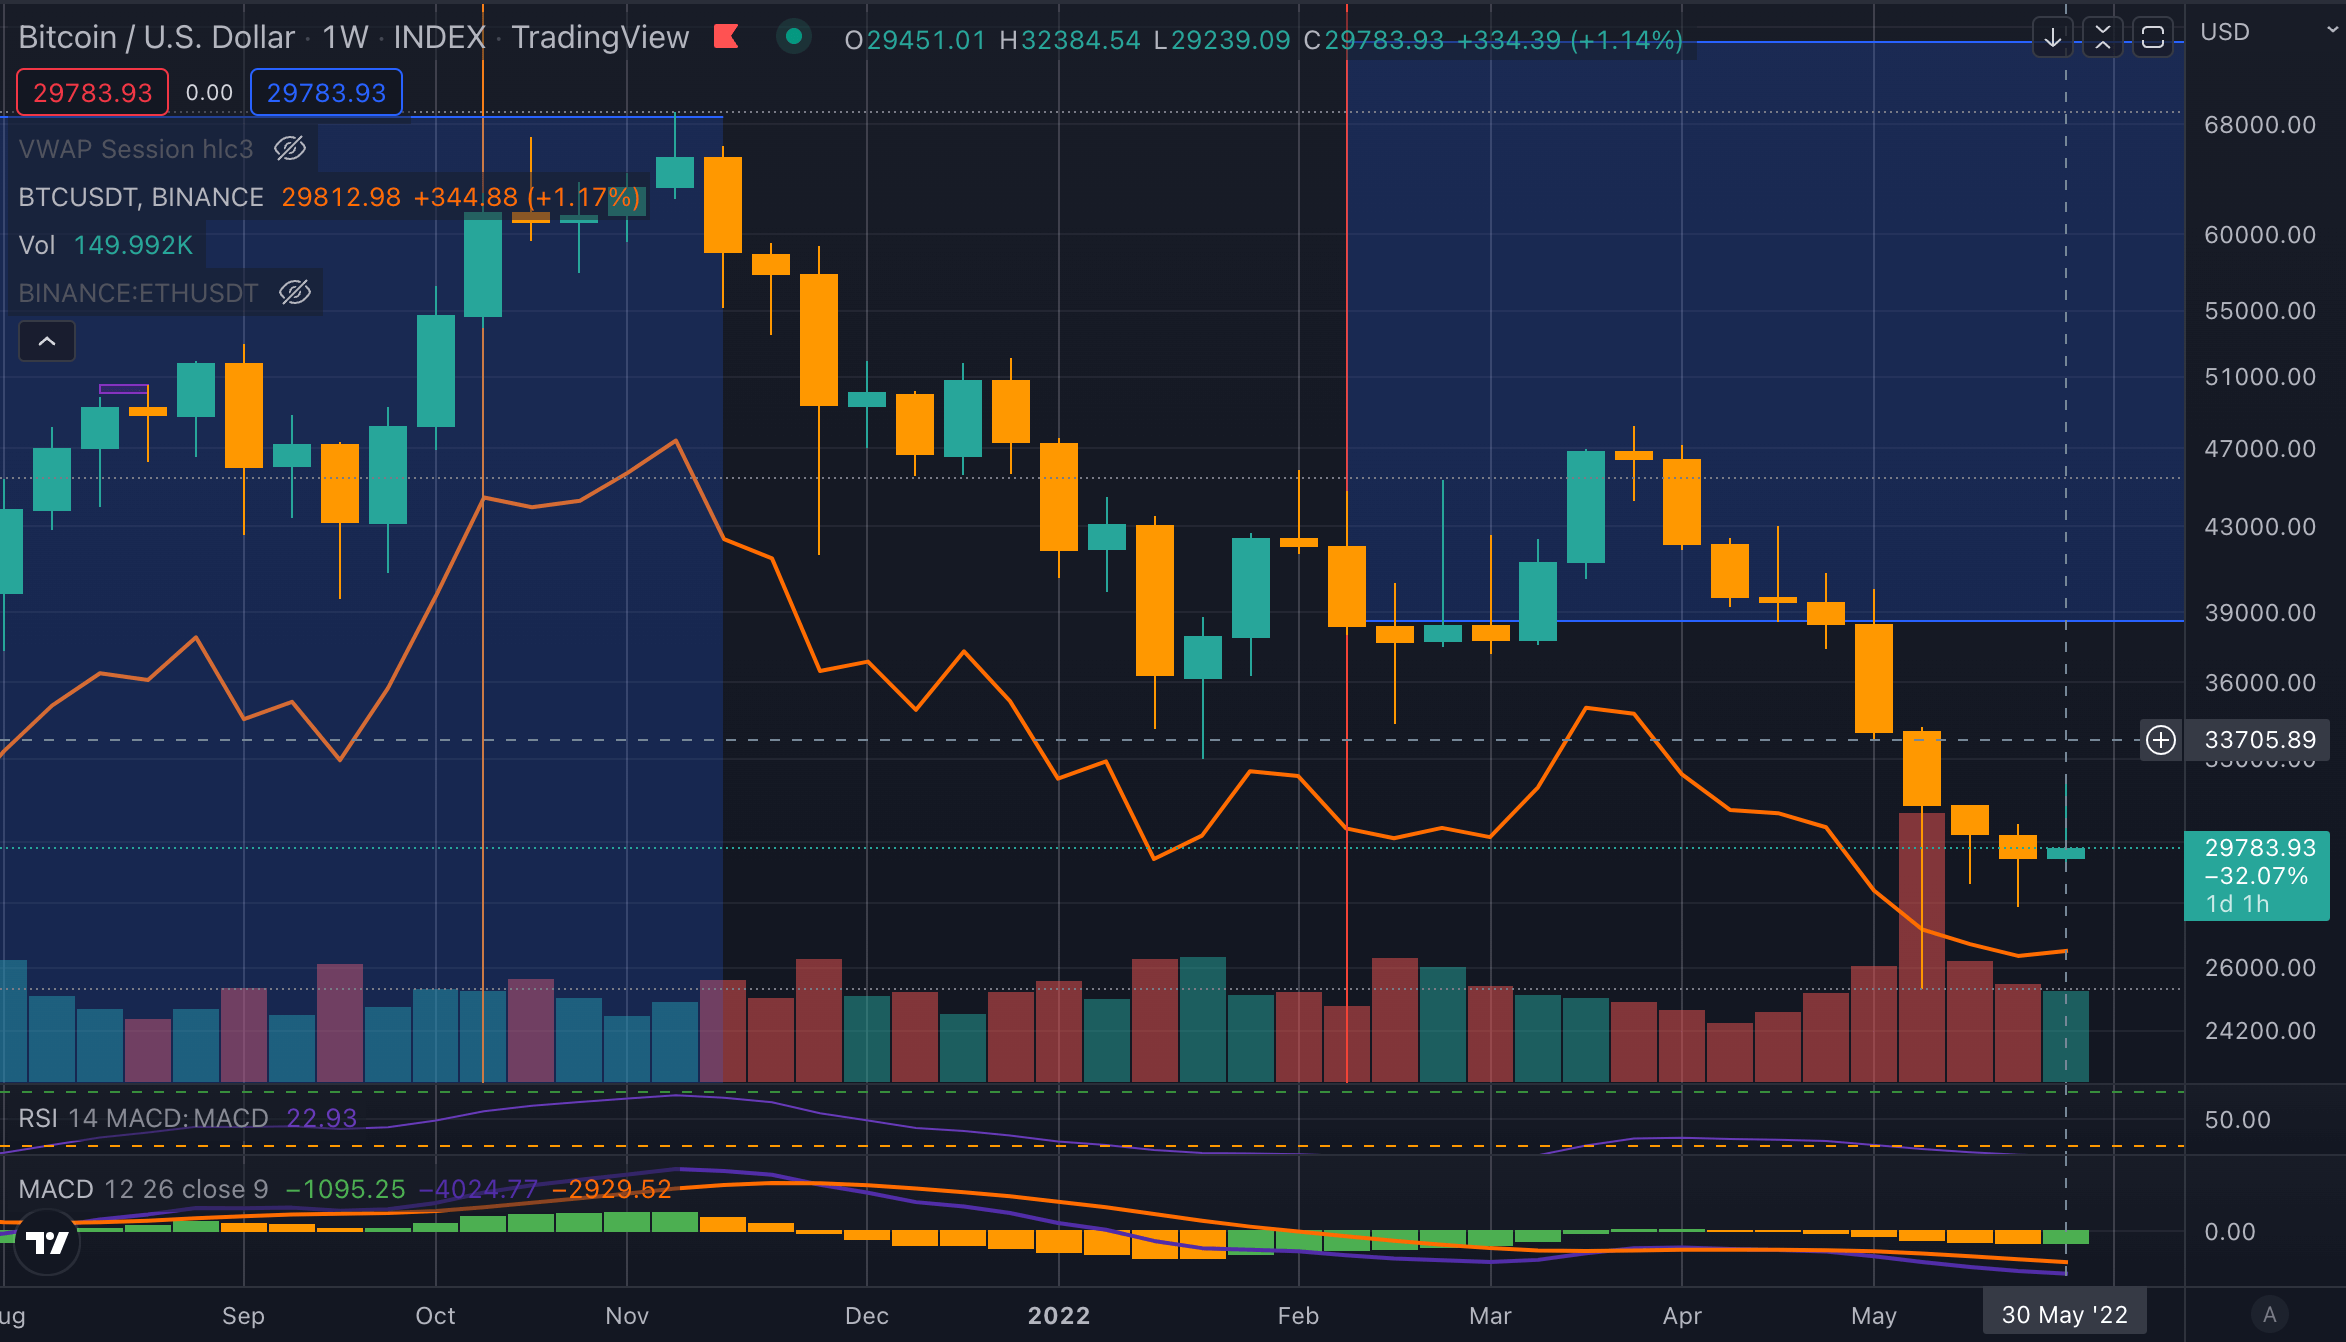 Bitcoin can avoid a 10th consecutive red weekly candle if it closes above $30,200